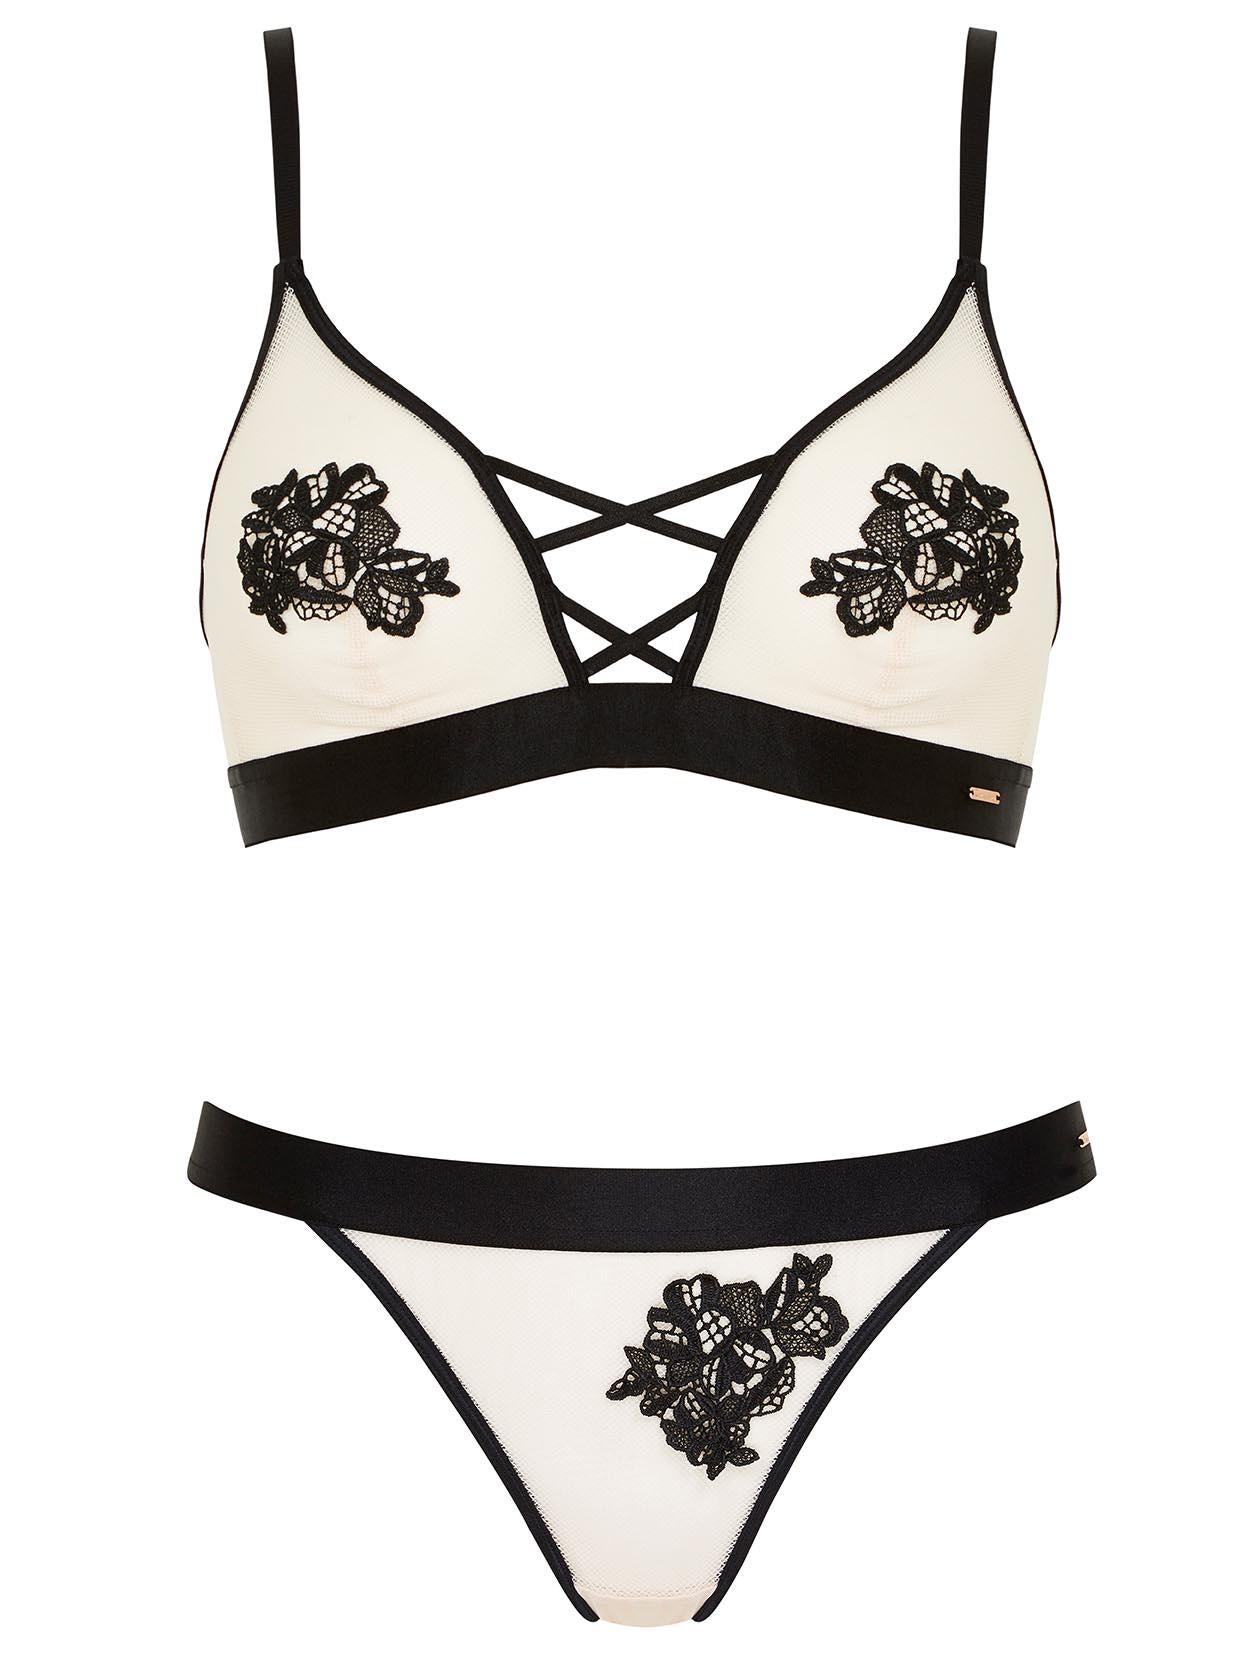 Celebrate national underwear day with the best lingerie for your